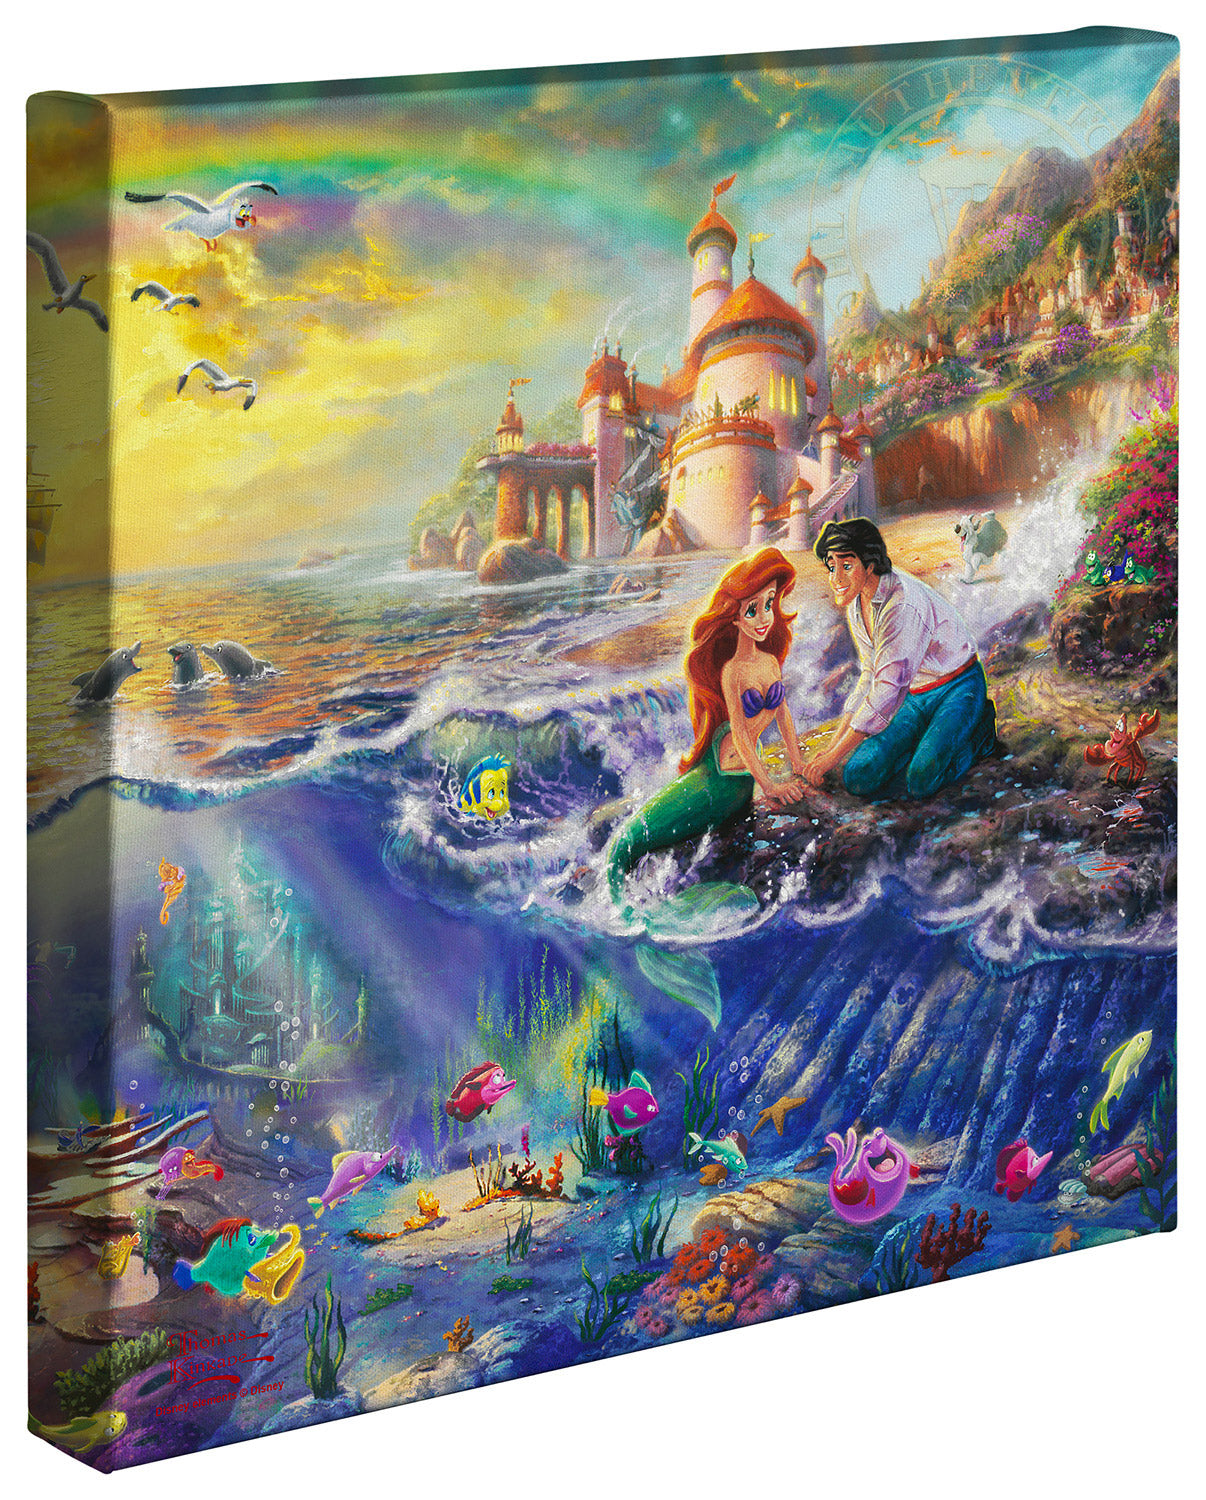 Thomas Kinkade Studios "The Little Mermaid" Limited and Open Canvas Giclee